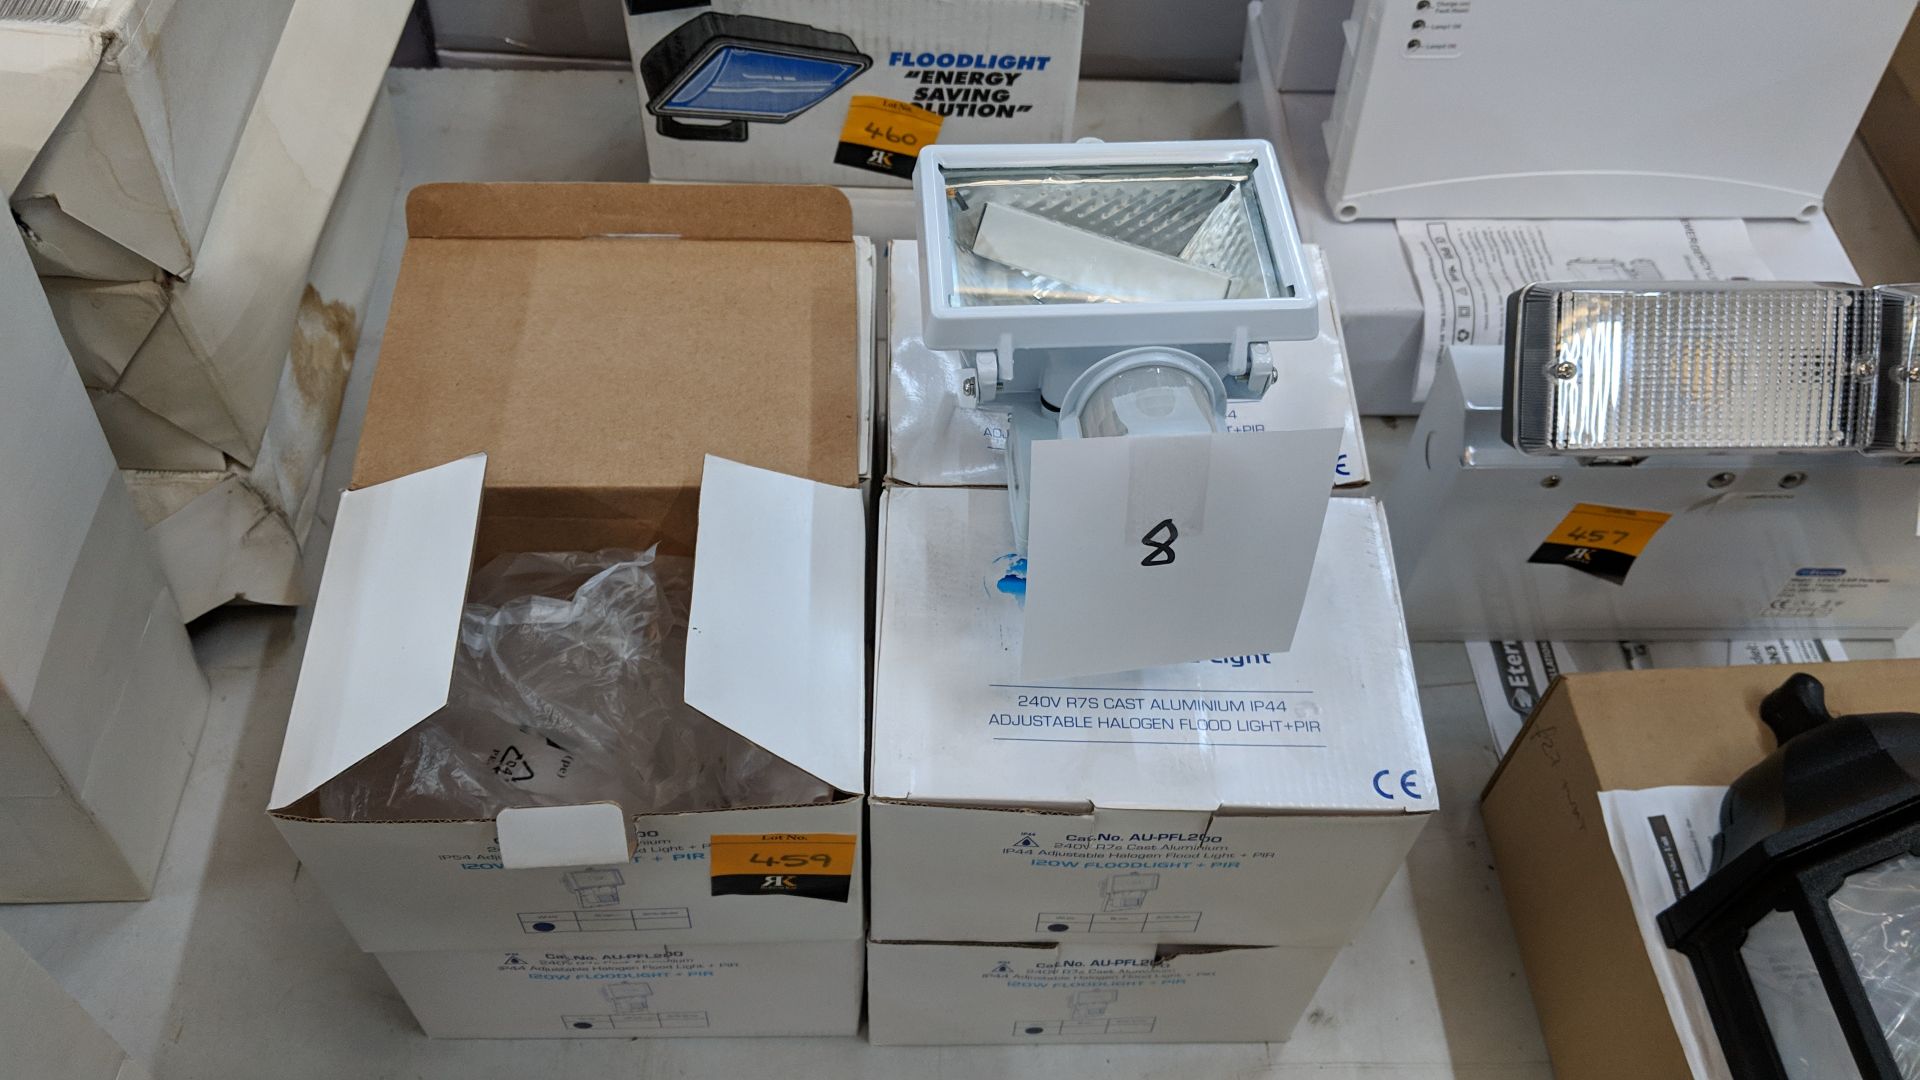 8 off 120W IP44 adjustable halogen floodlight & PIR units This lot is one of a number of lots in